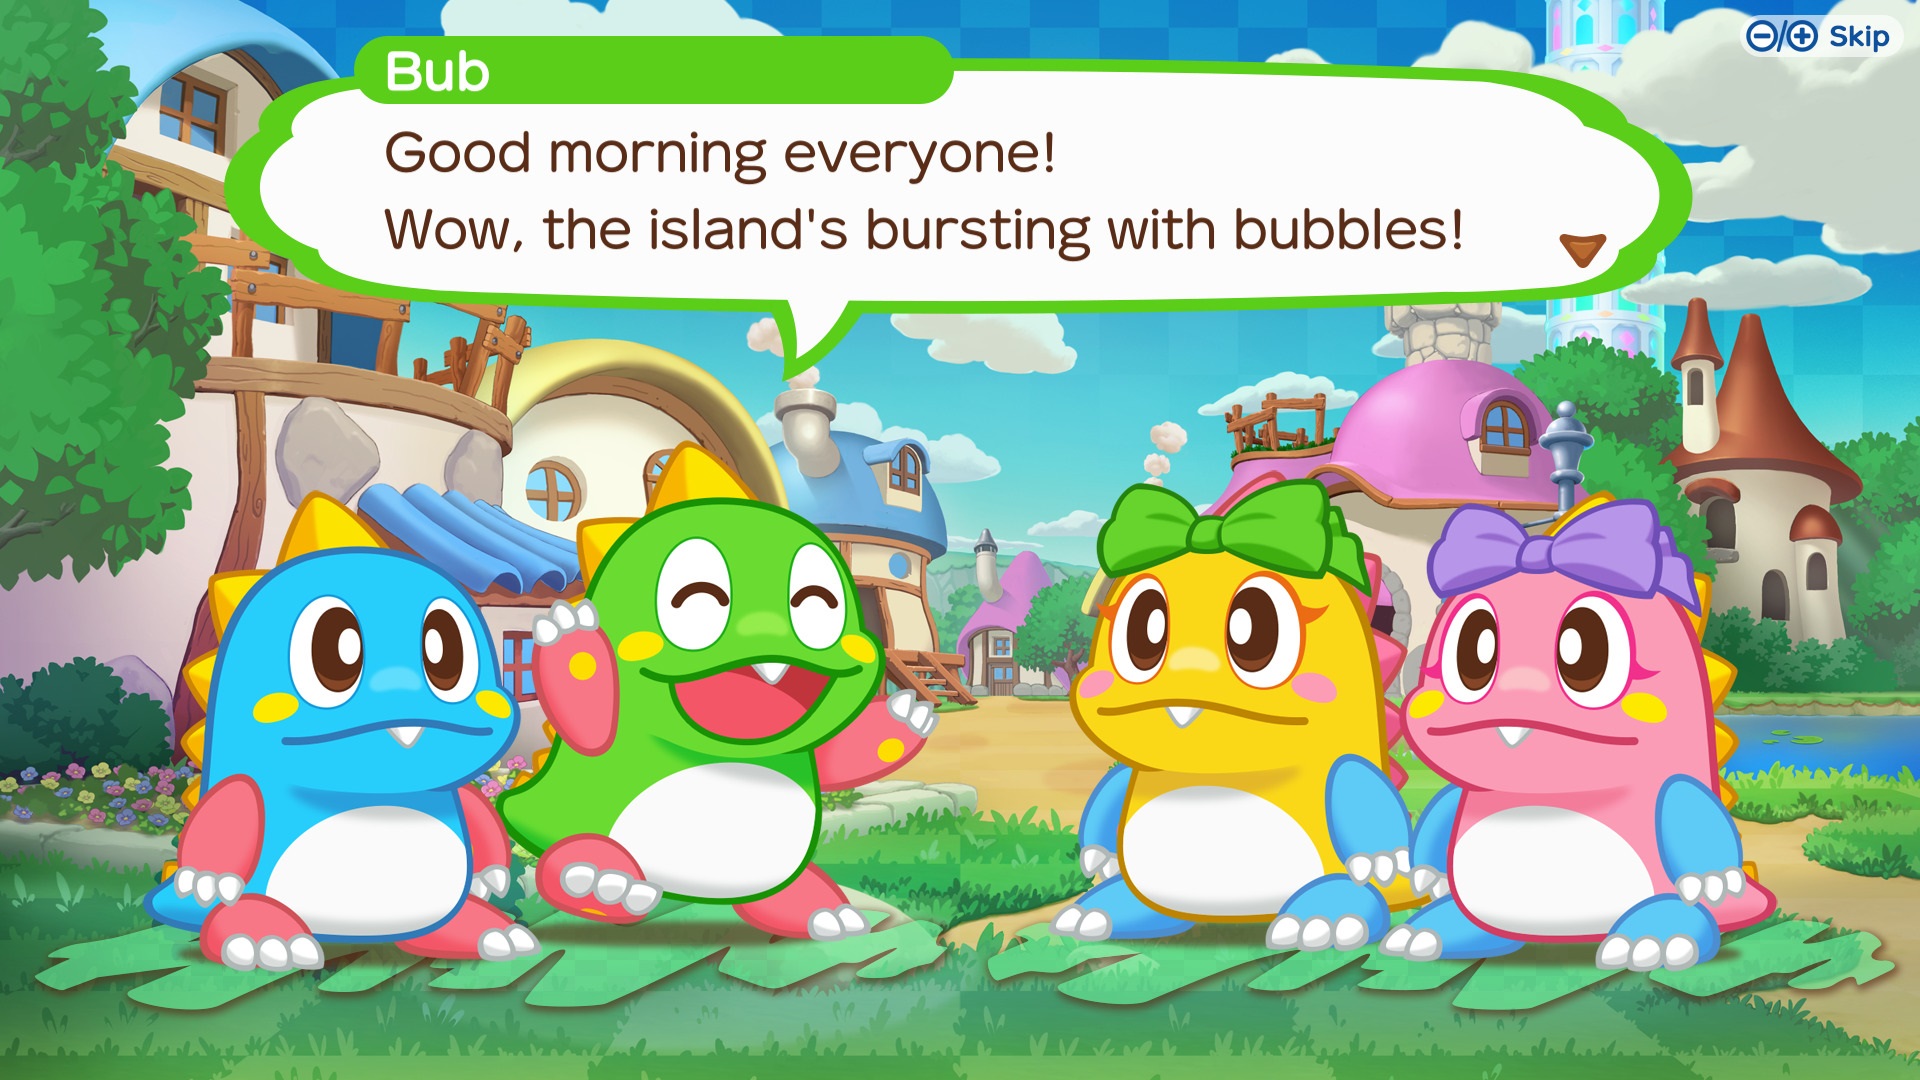 Puzzle Bobble Everybubble! announced for Switch, worldwide release set